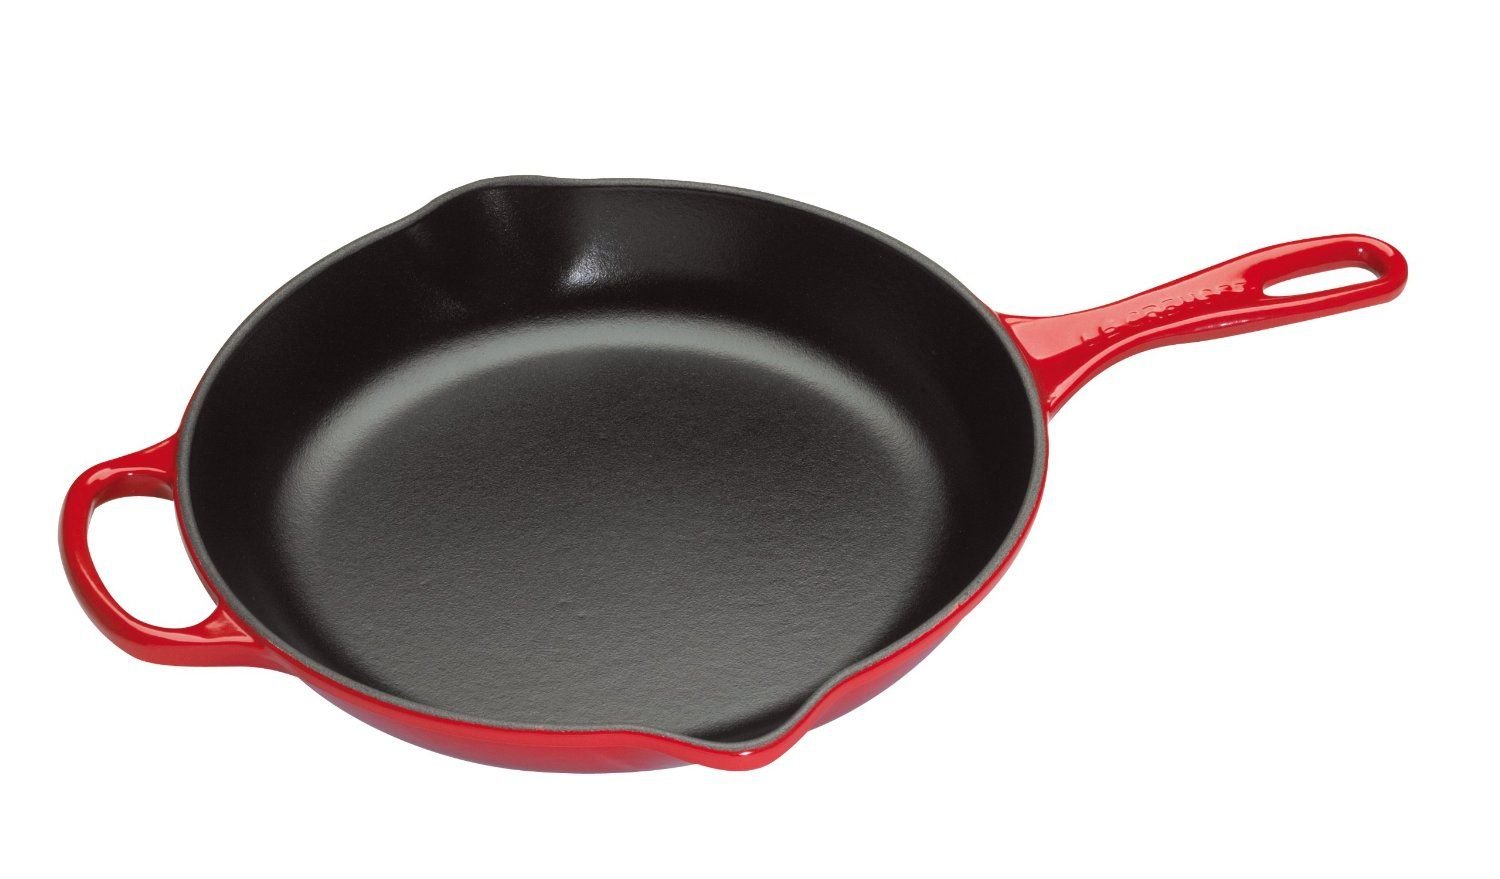 https://cdn.everythingkitchens.com/media/catalog/product/cache/70d878061ea71e5b62358b2b67547186/l/e/le-creuset-cookware-cast-iron-skillet-10-inches-cherry-red-ls2024-2667.jpg